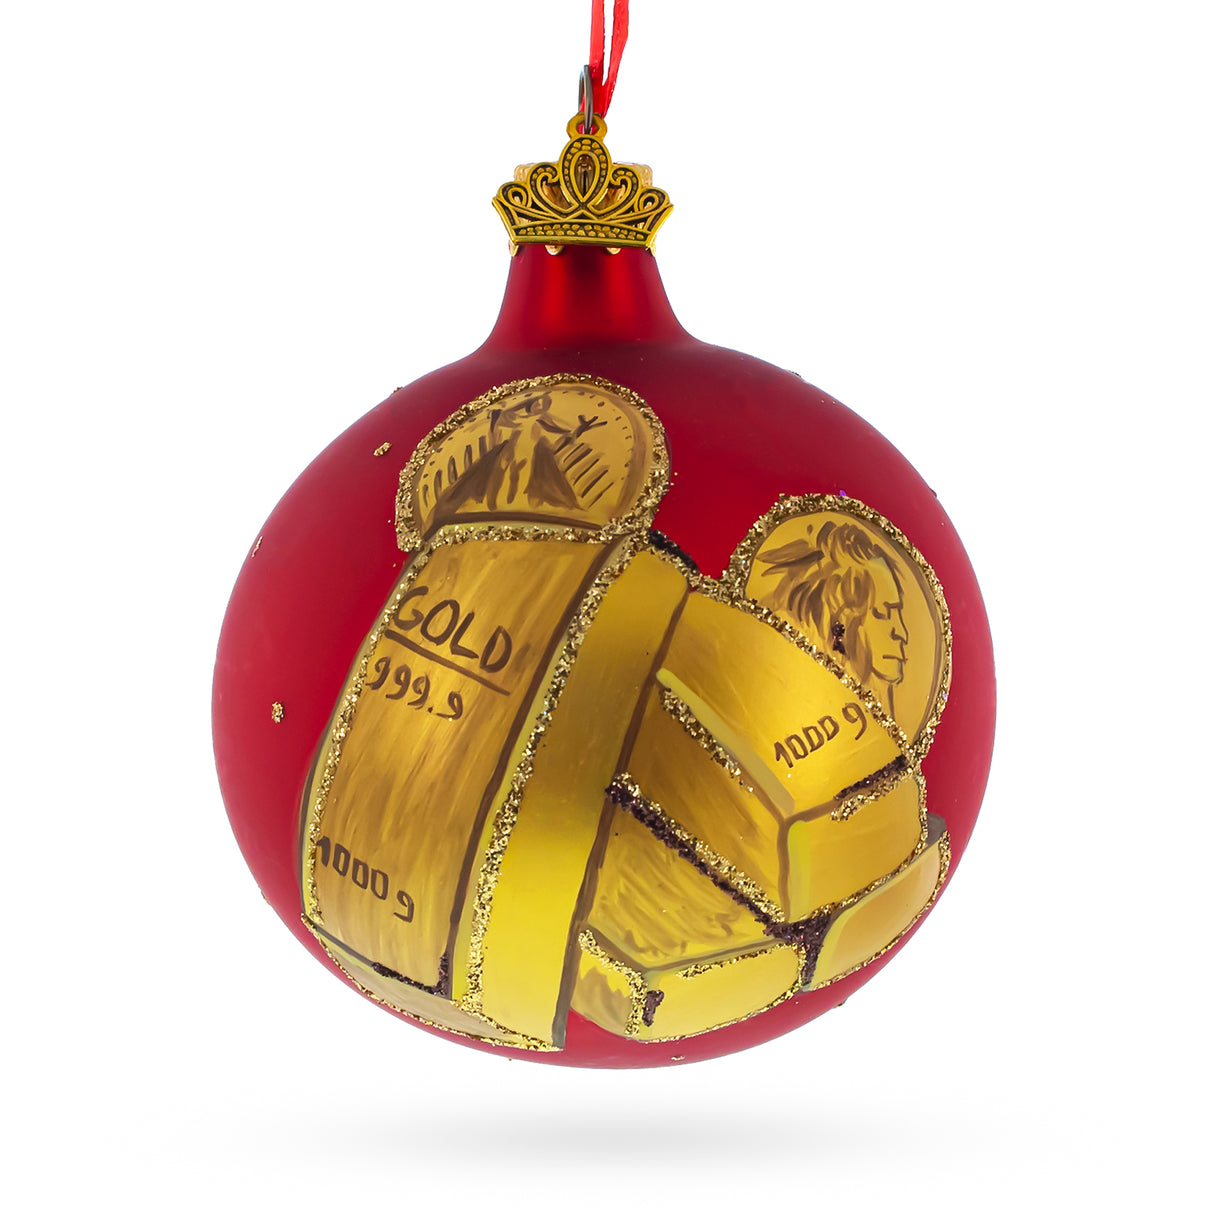 Glass Treasures of Wealth: Gold Bars and Coins Blown Glass Ball Christmas Ornament 3.25 Inches in Red color Round